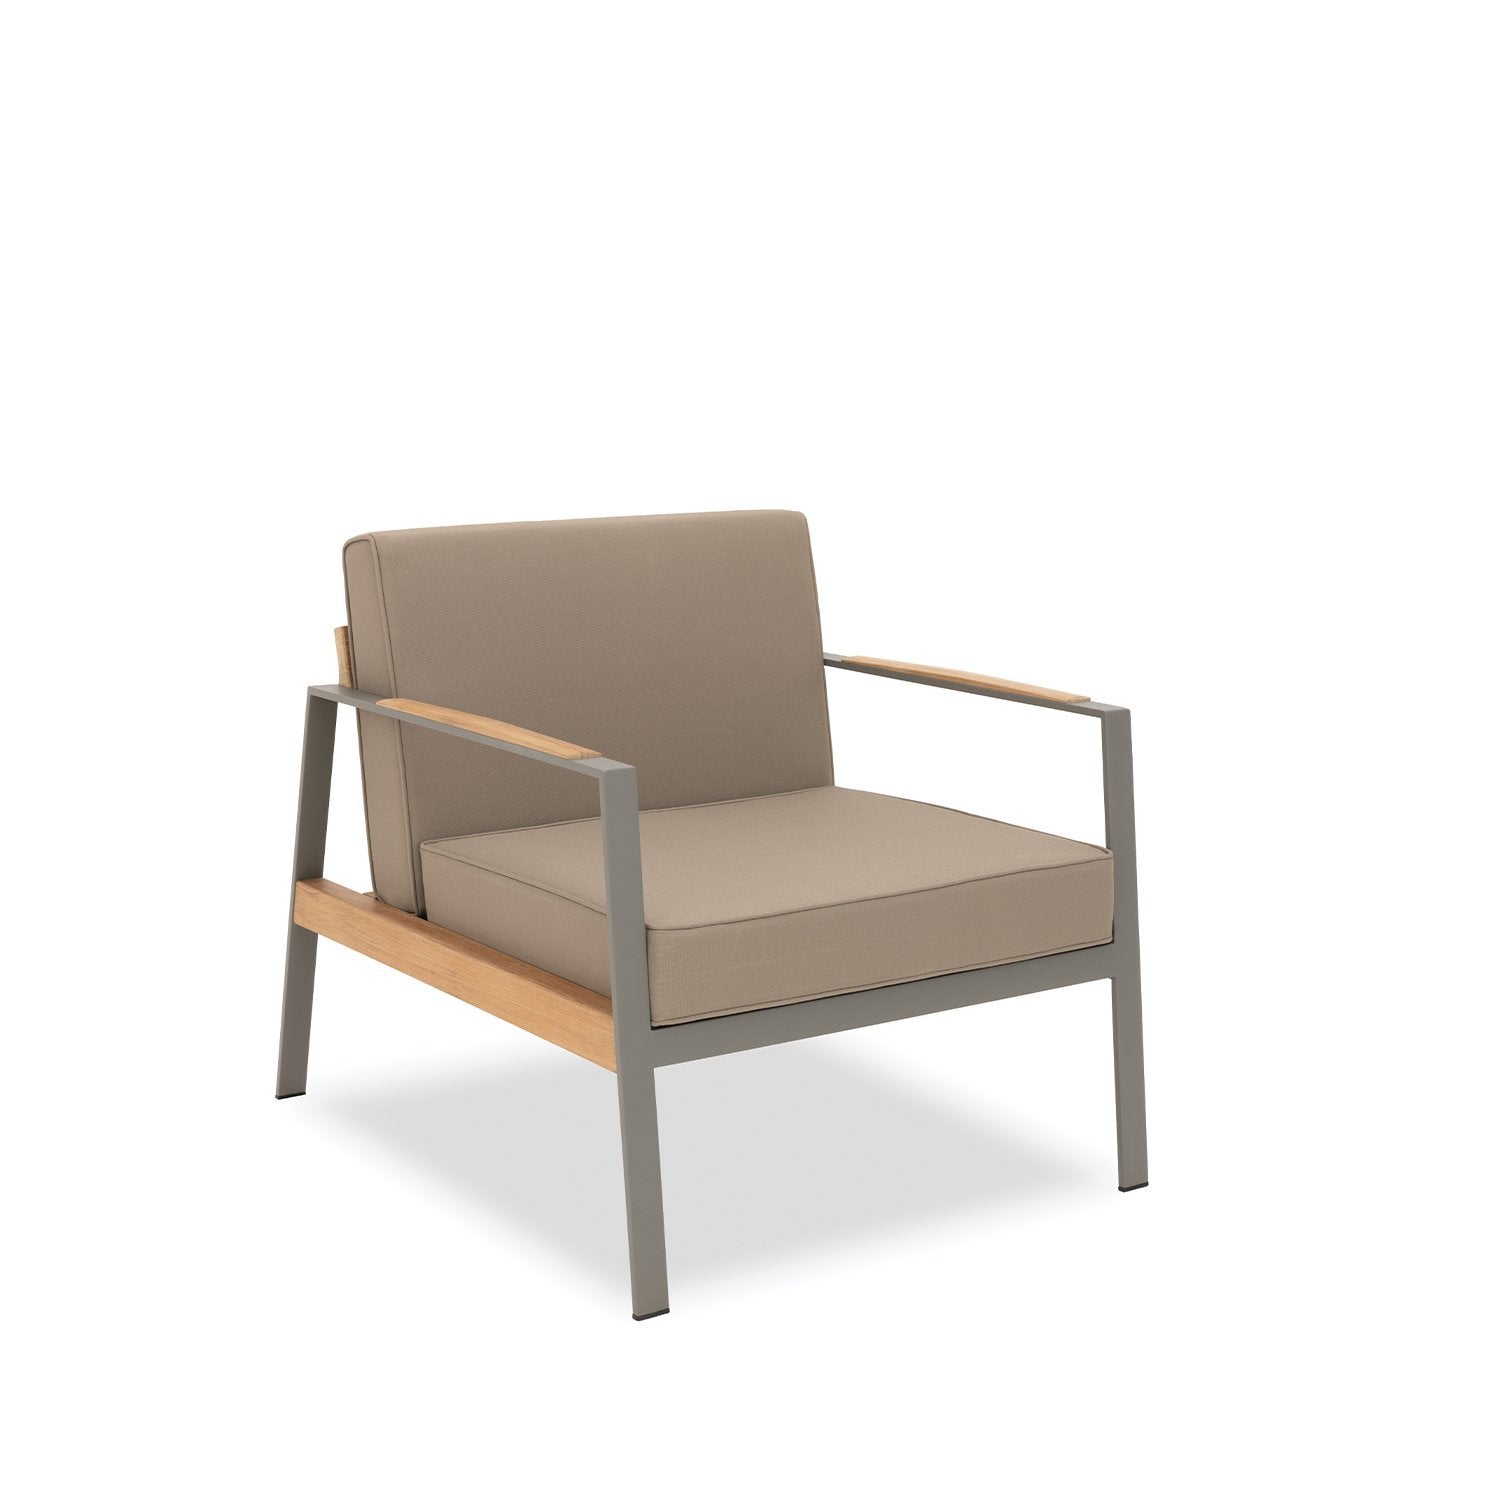 California Armchair with taupe cushions